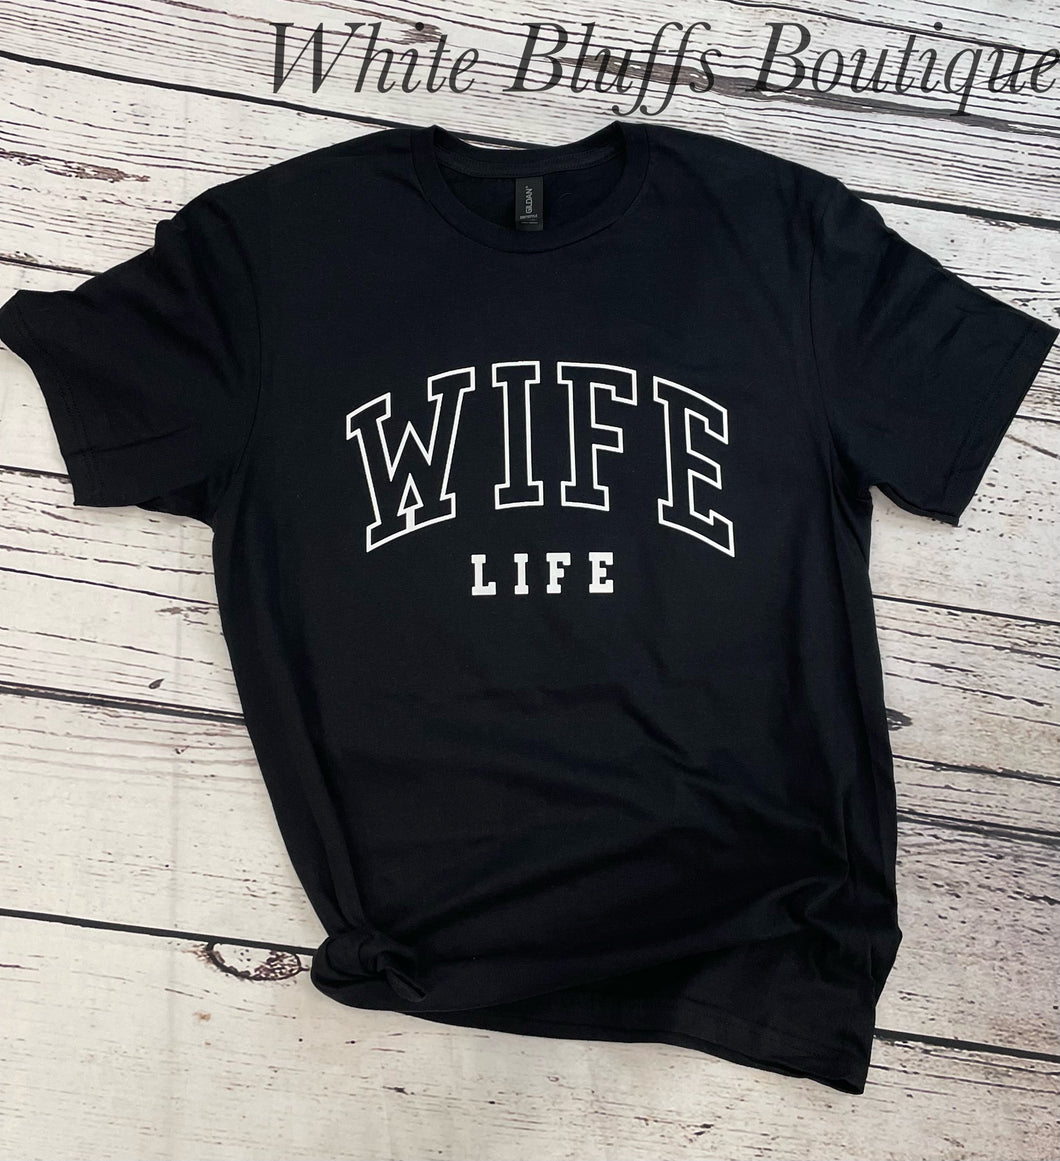 #WIFELIFE Tee - Made to Order